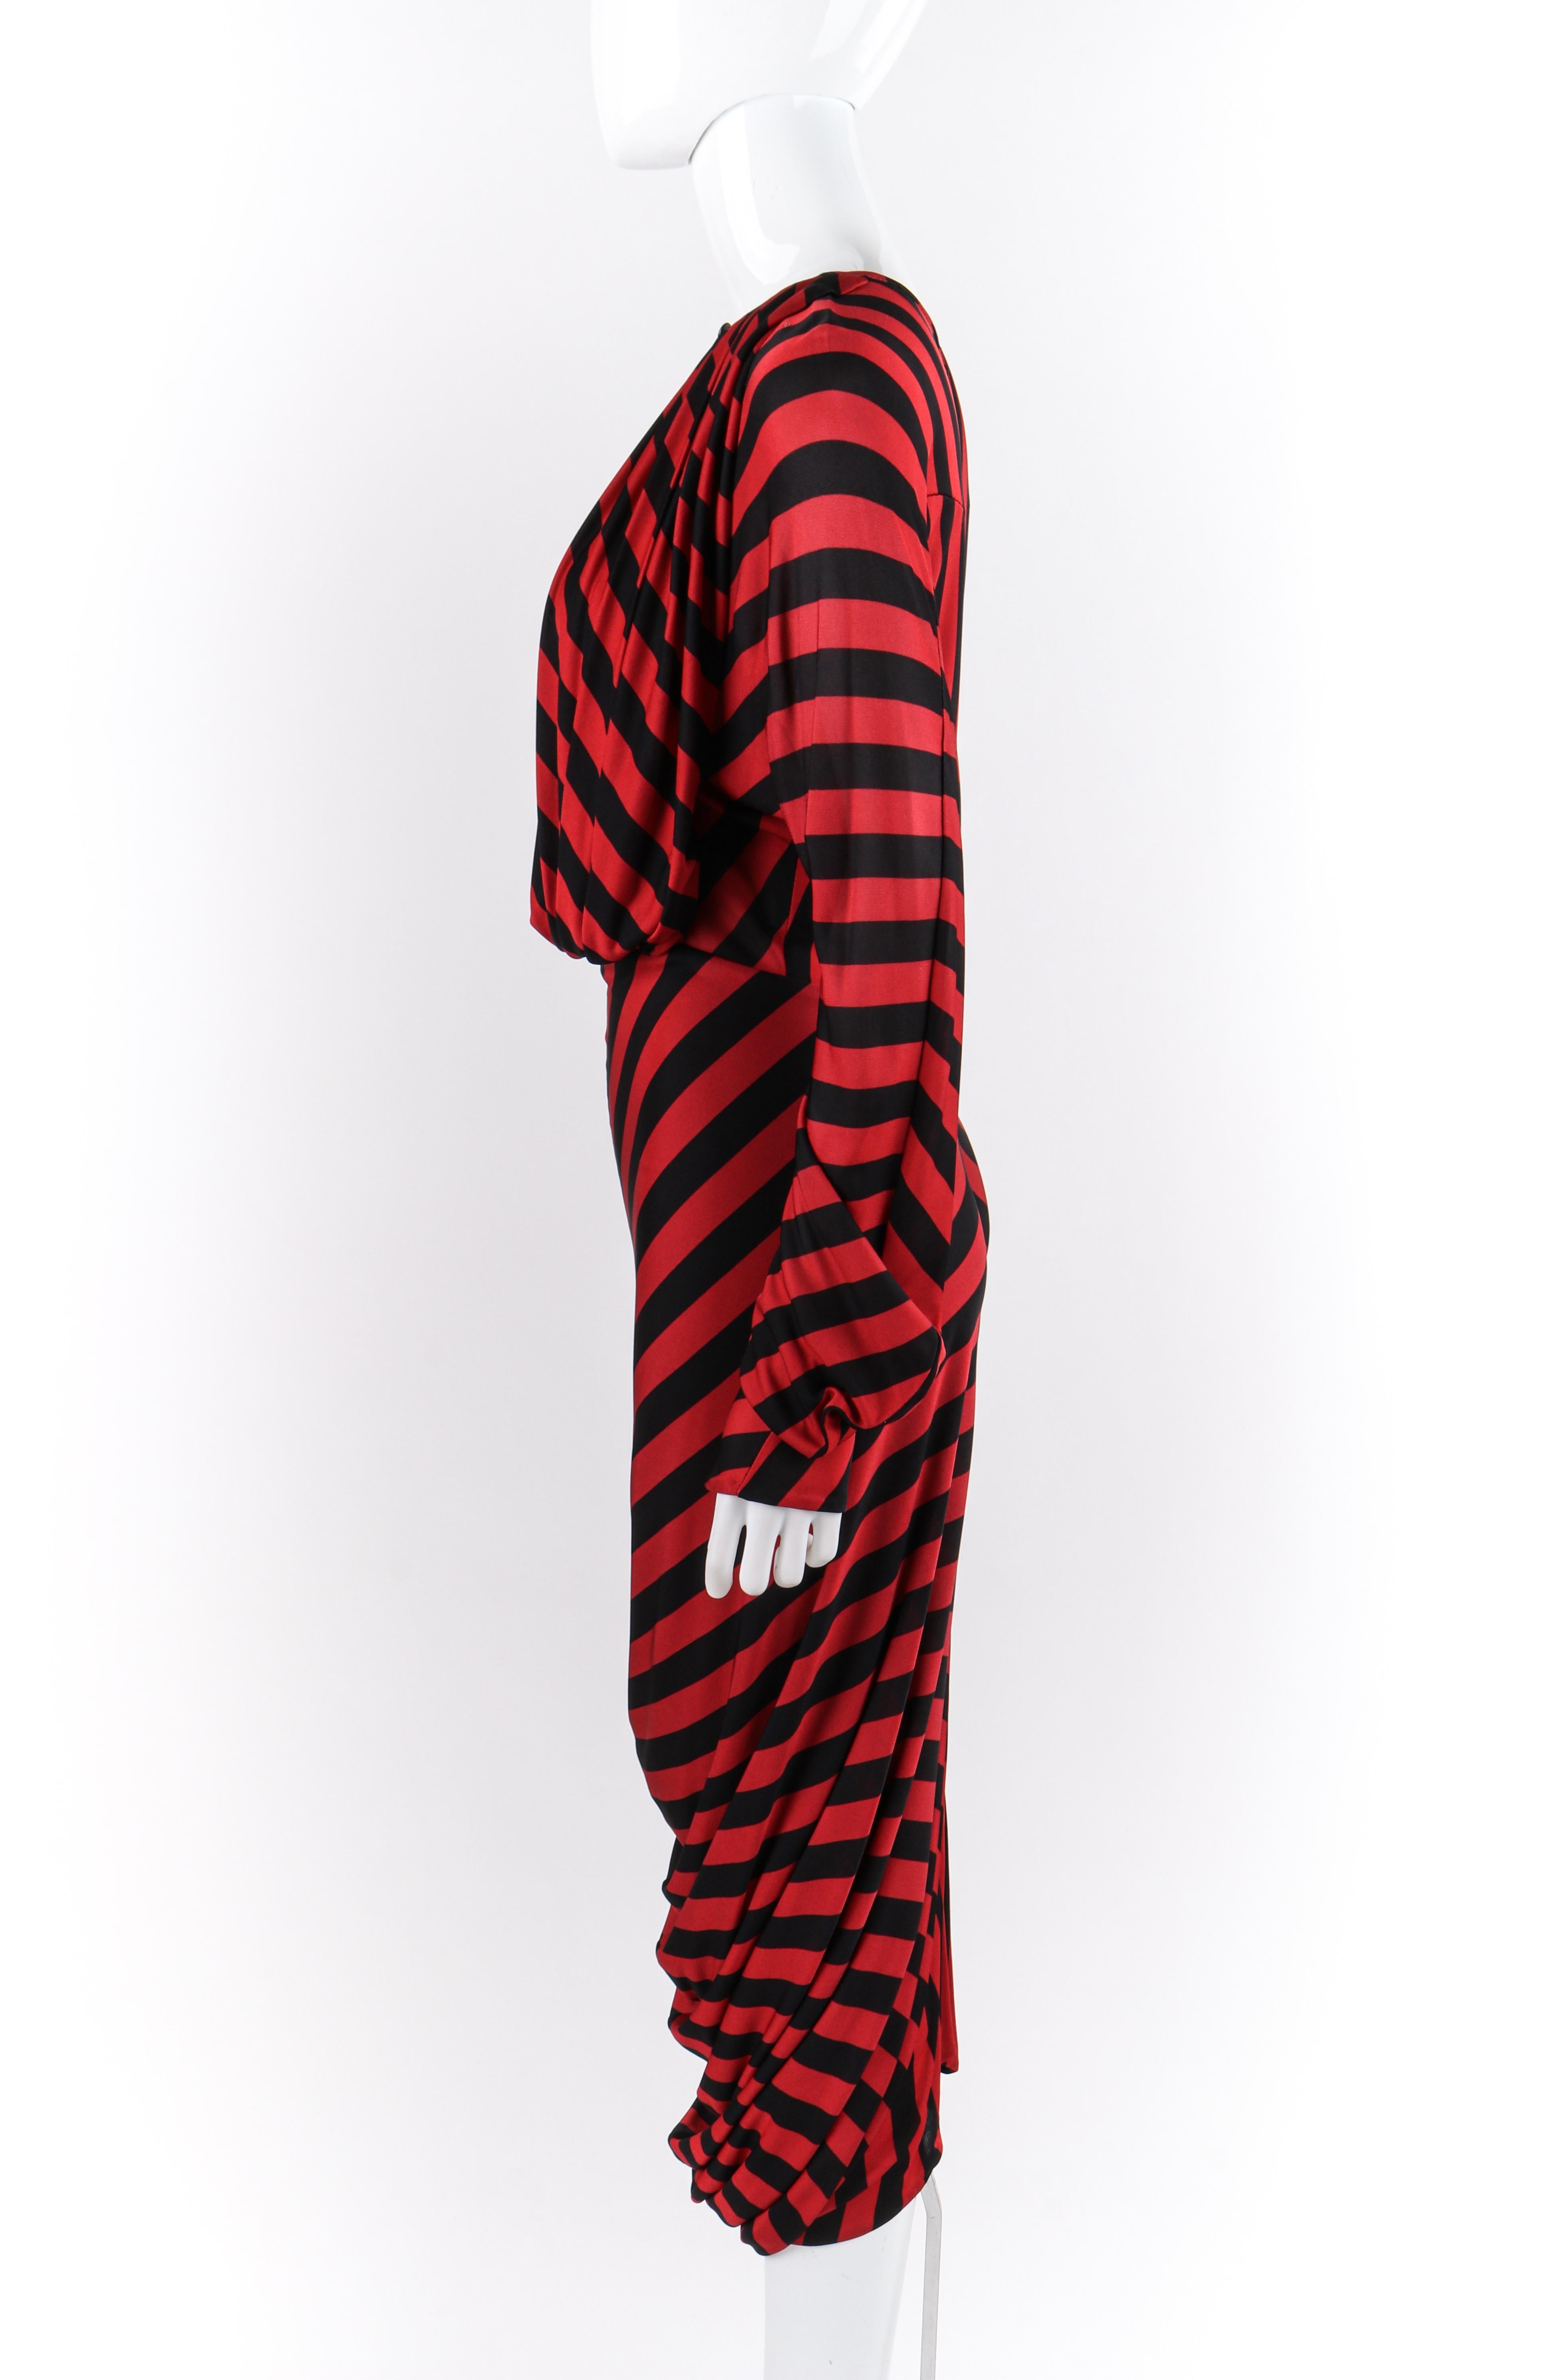 ALEXANDER McQUEEN F/W 2009 “The Horn of Plenty” Red Black Chevron Ruched Dress For Sale 1